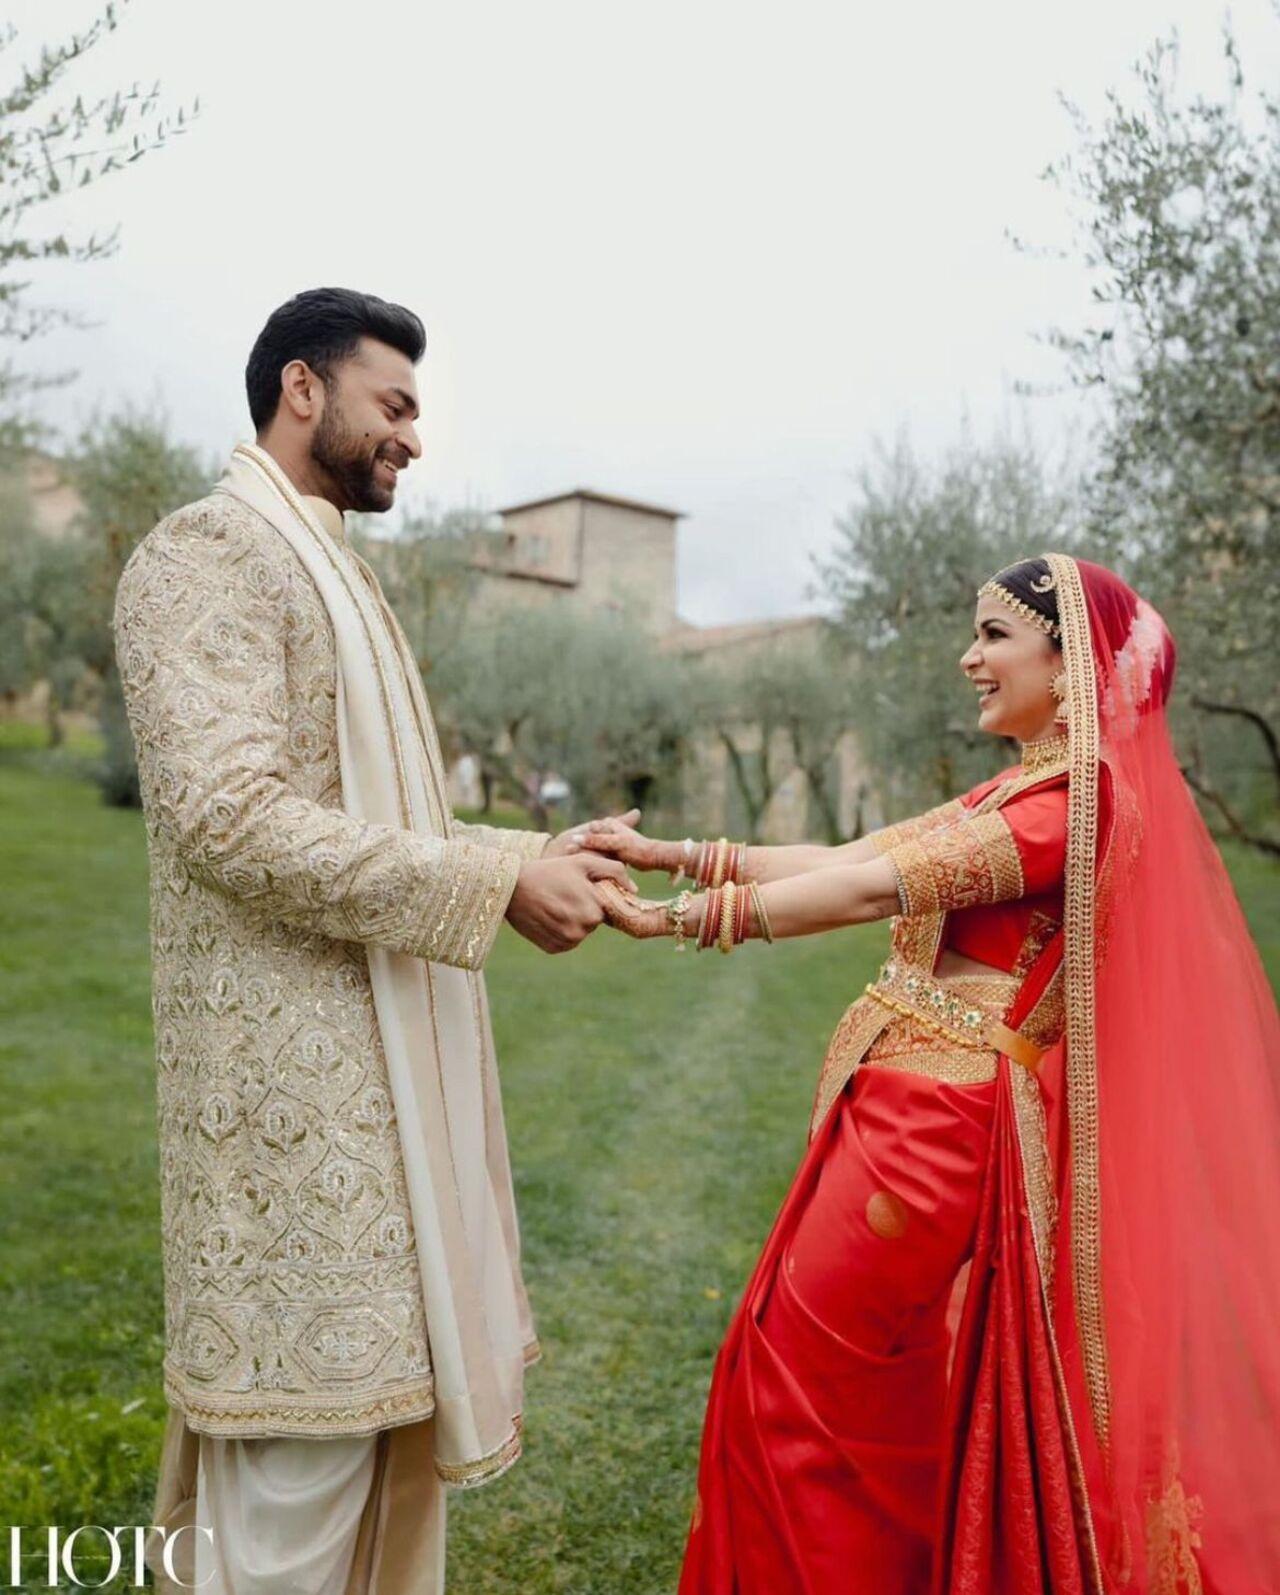 The couple had a beautiful traditional ceremony in Italy